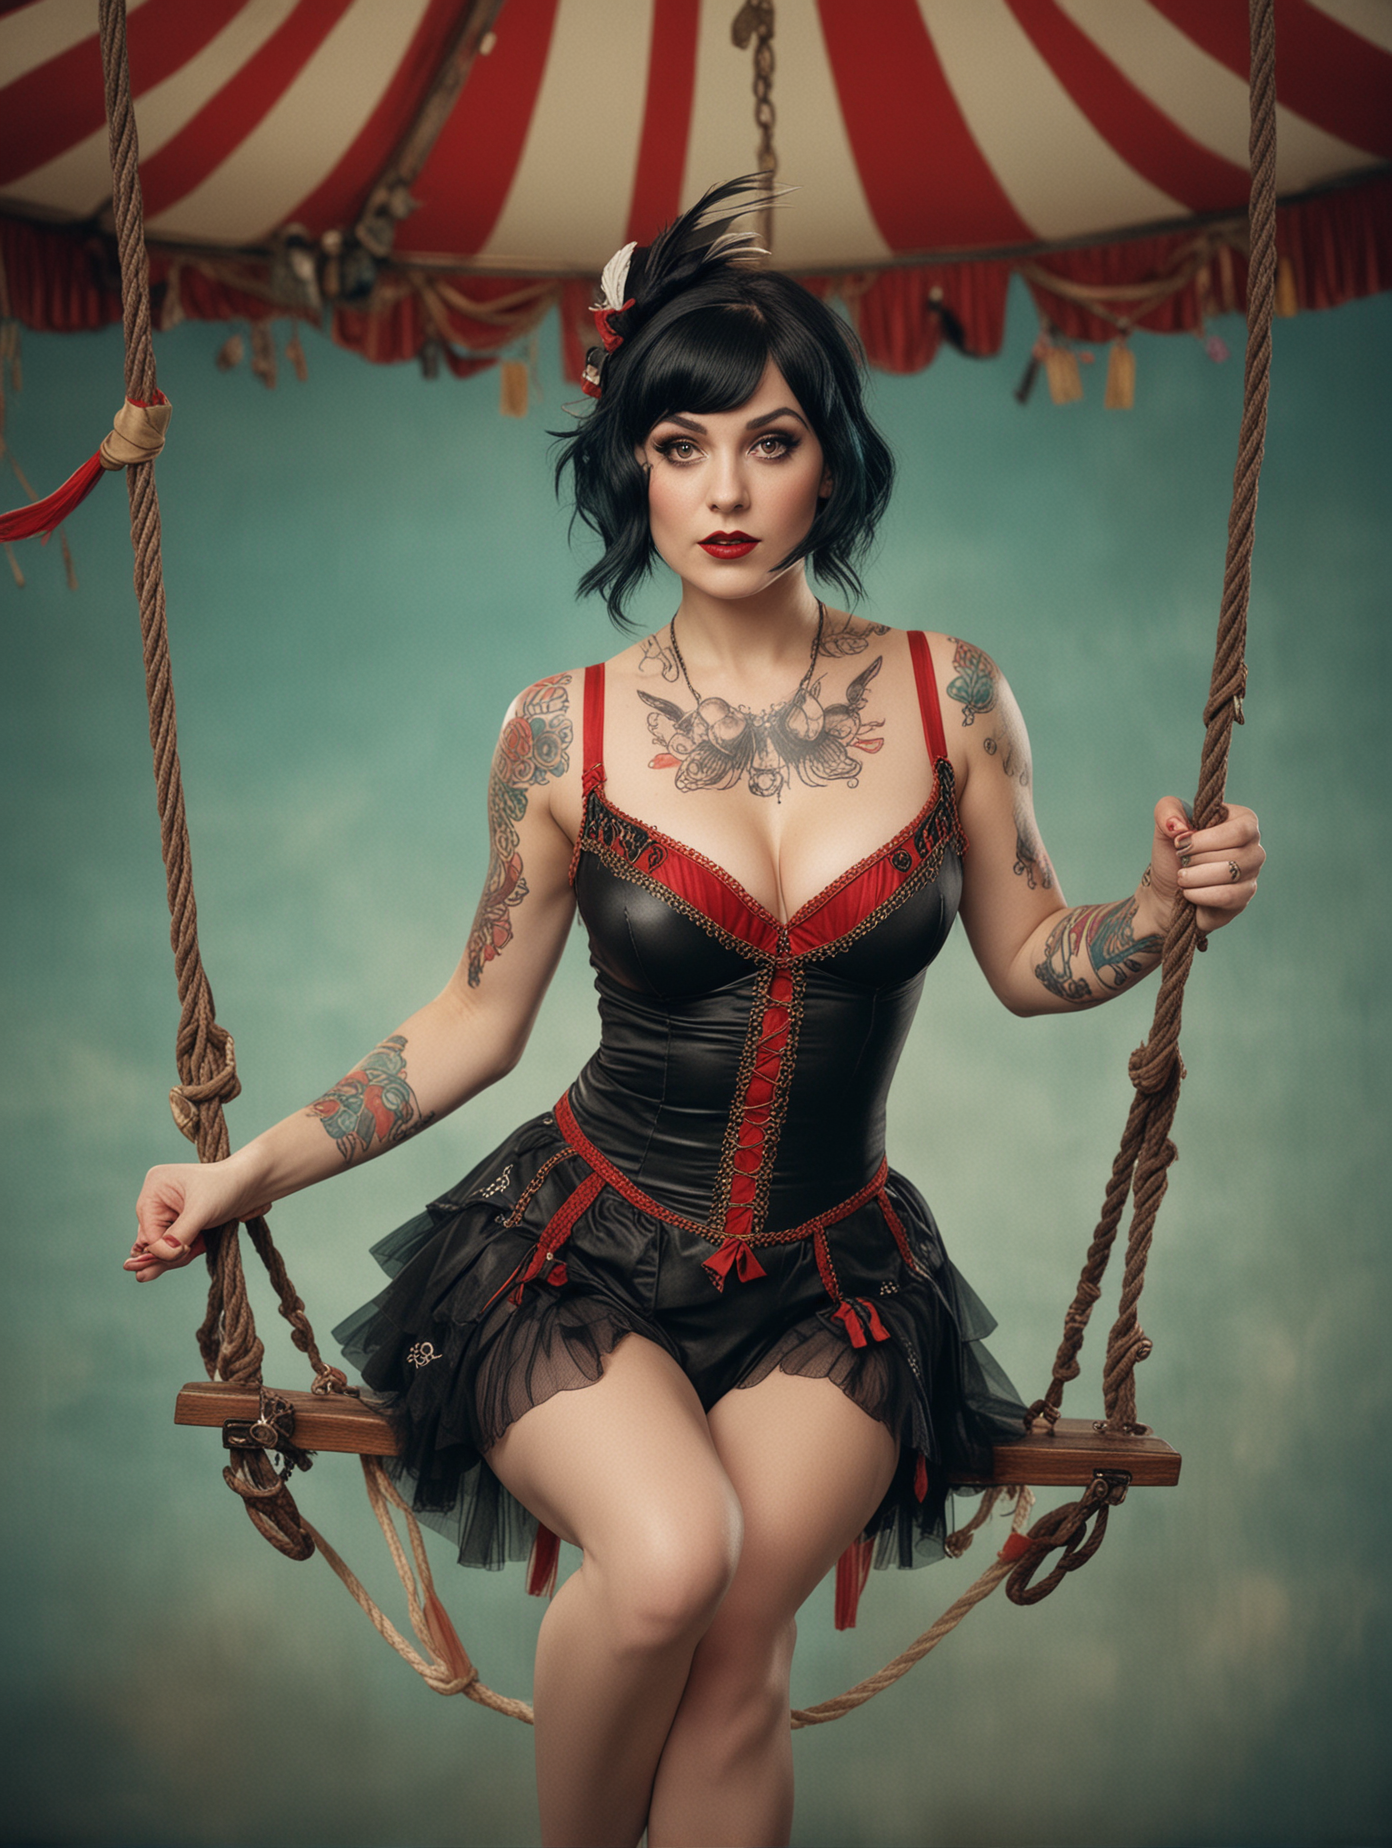 circus, in the style of whimsical yet eerie symbolism, American 1920's circus, light cyan and red palette, close up portraiture, well built busty female acrobat with black hair, wearing a pirate themed outfit, pirate hat, leotard and tutu, covered in tatoos, sitting on a trapeze swing, nature-inspired pieces, circus costumes, ultra details